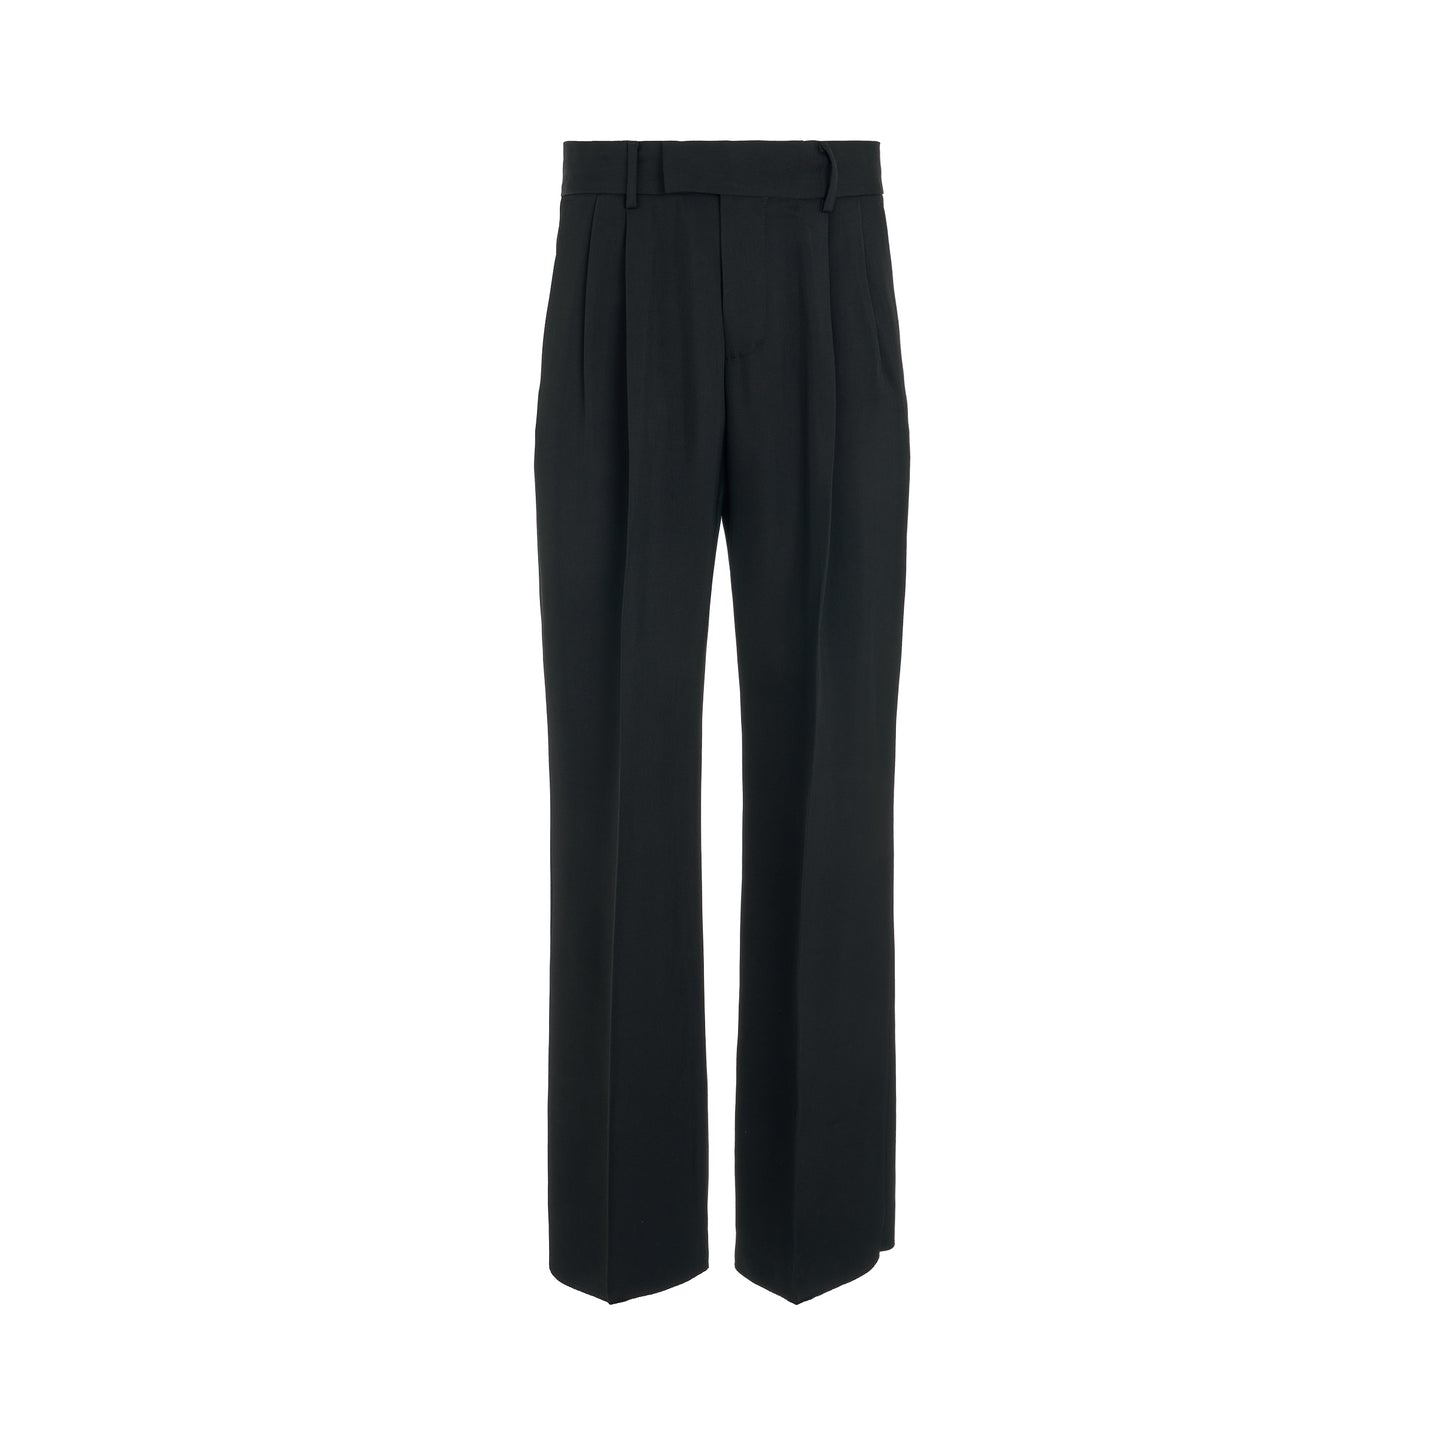 Double Pleated Pants in Black